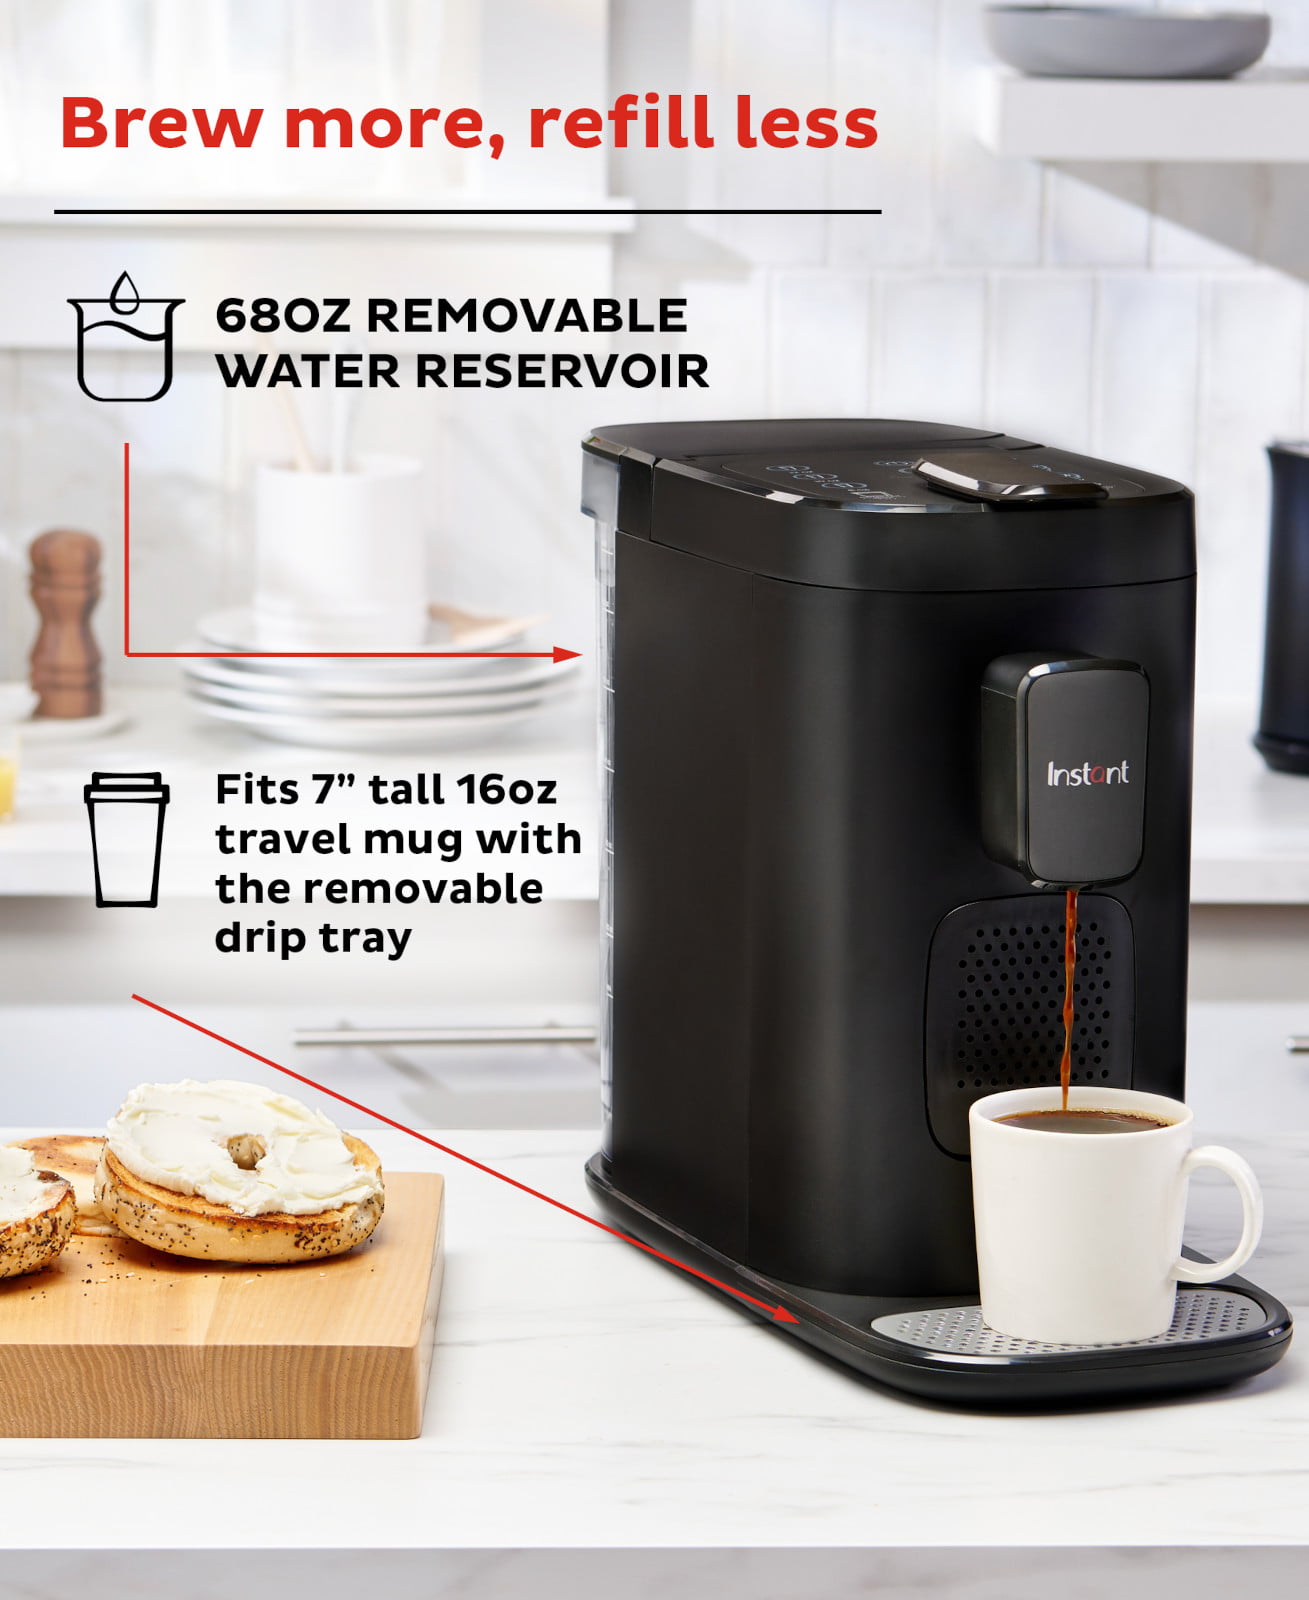 Has anyone used the Instapot coffee maker? Supposedly used both